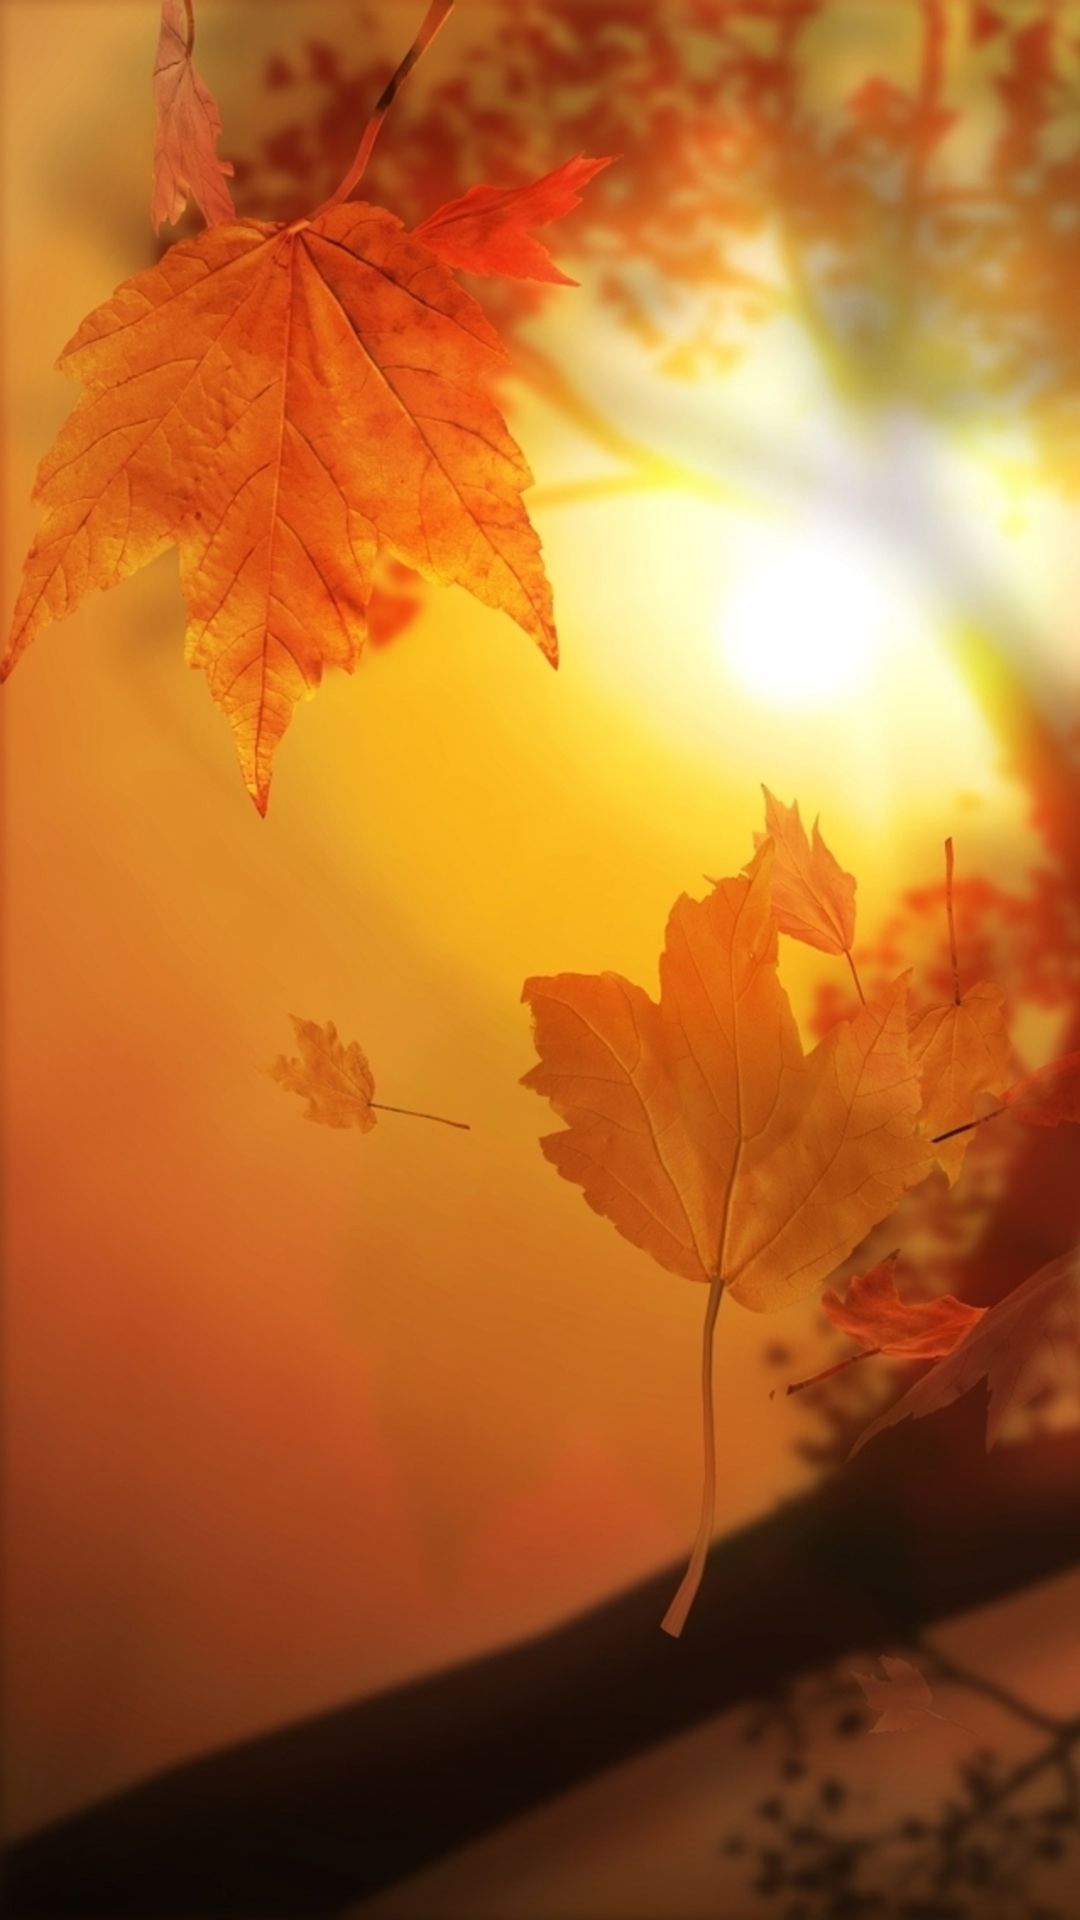 Nature Autumn Sunset Yellow Leaves Flyiing Sunshine iPhone 6 Wallpaper Download. iPhone Wallpaper, iPad w. Fall wallpaper, iPhone 5s wallpaper, iPhone wallpaper